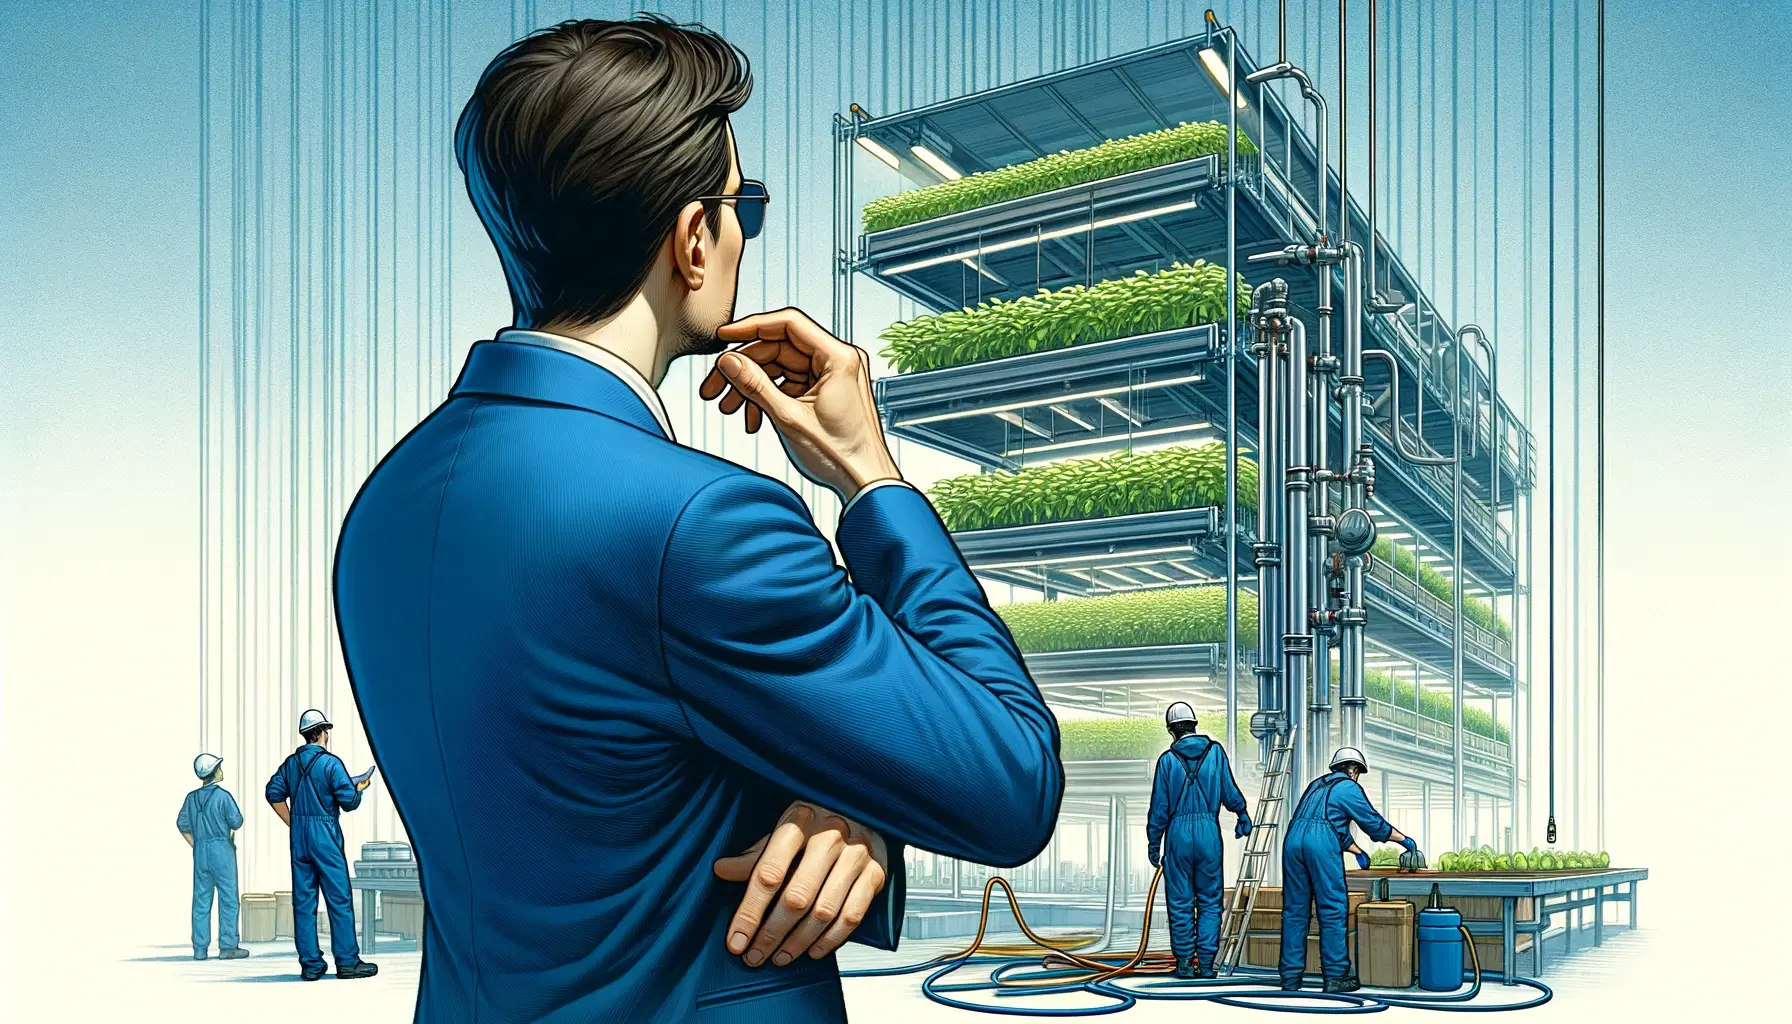 Water consumption in vertical farming